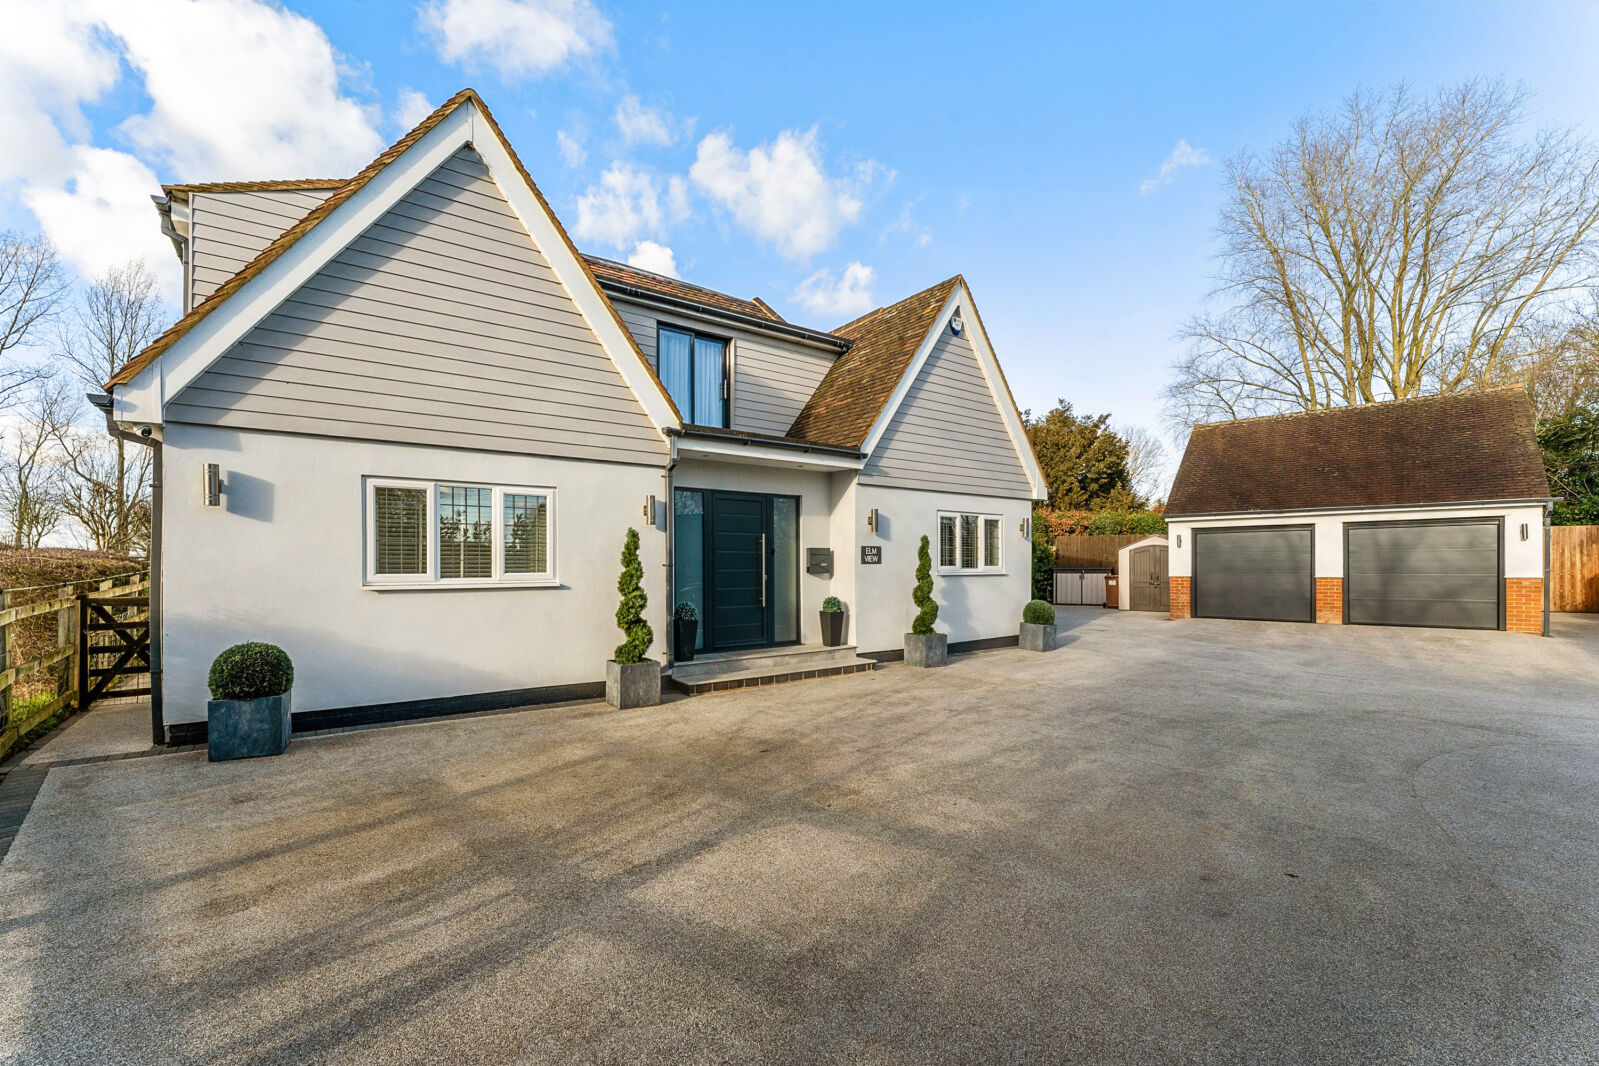 4 bedroom detached house for sale South End, Much Hadham, SG10, main image